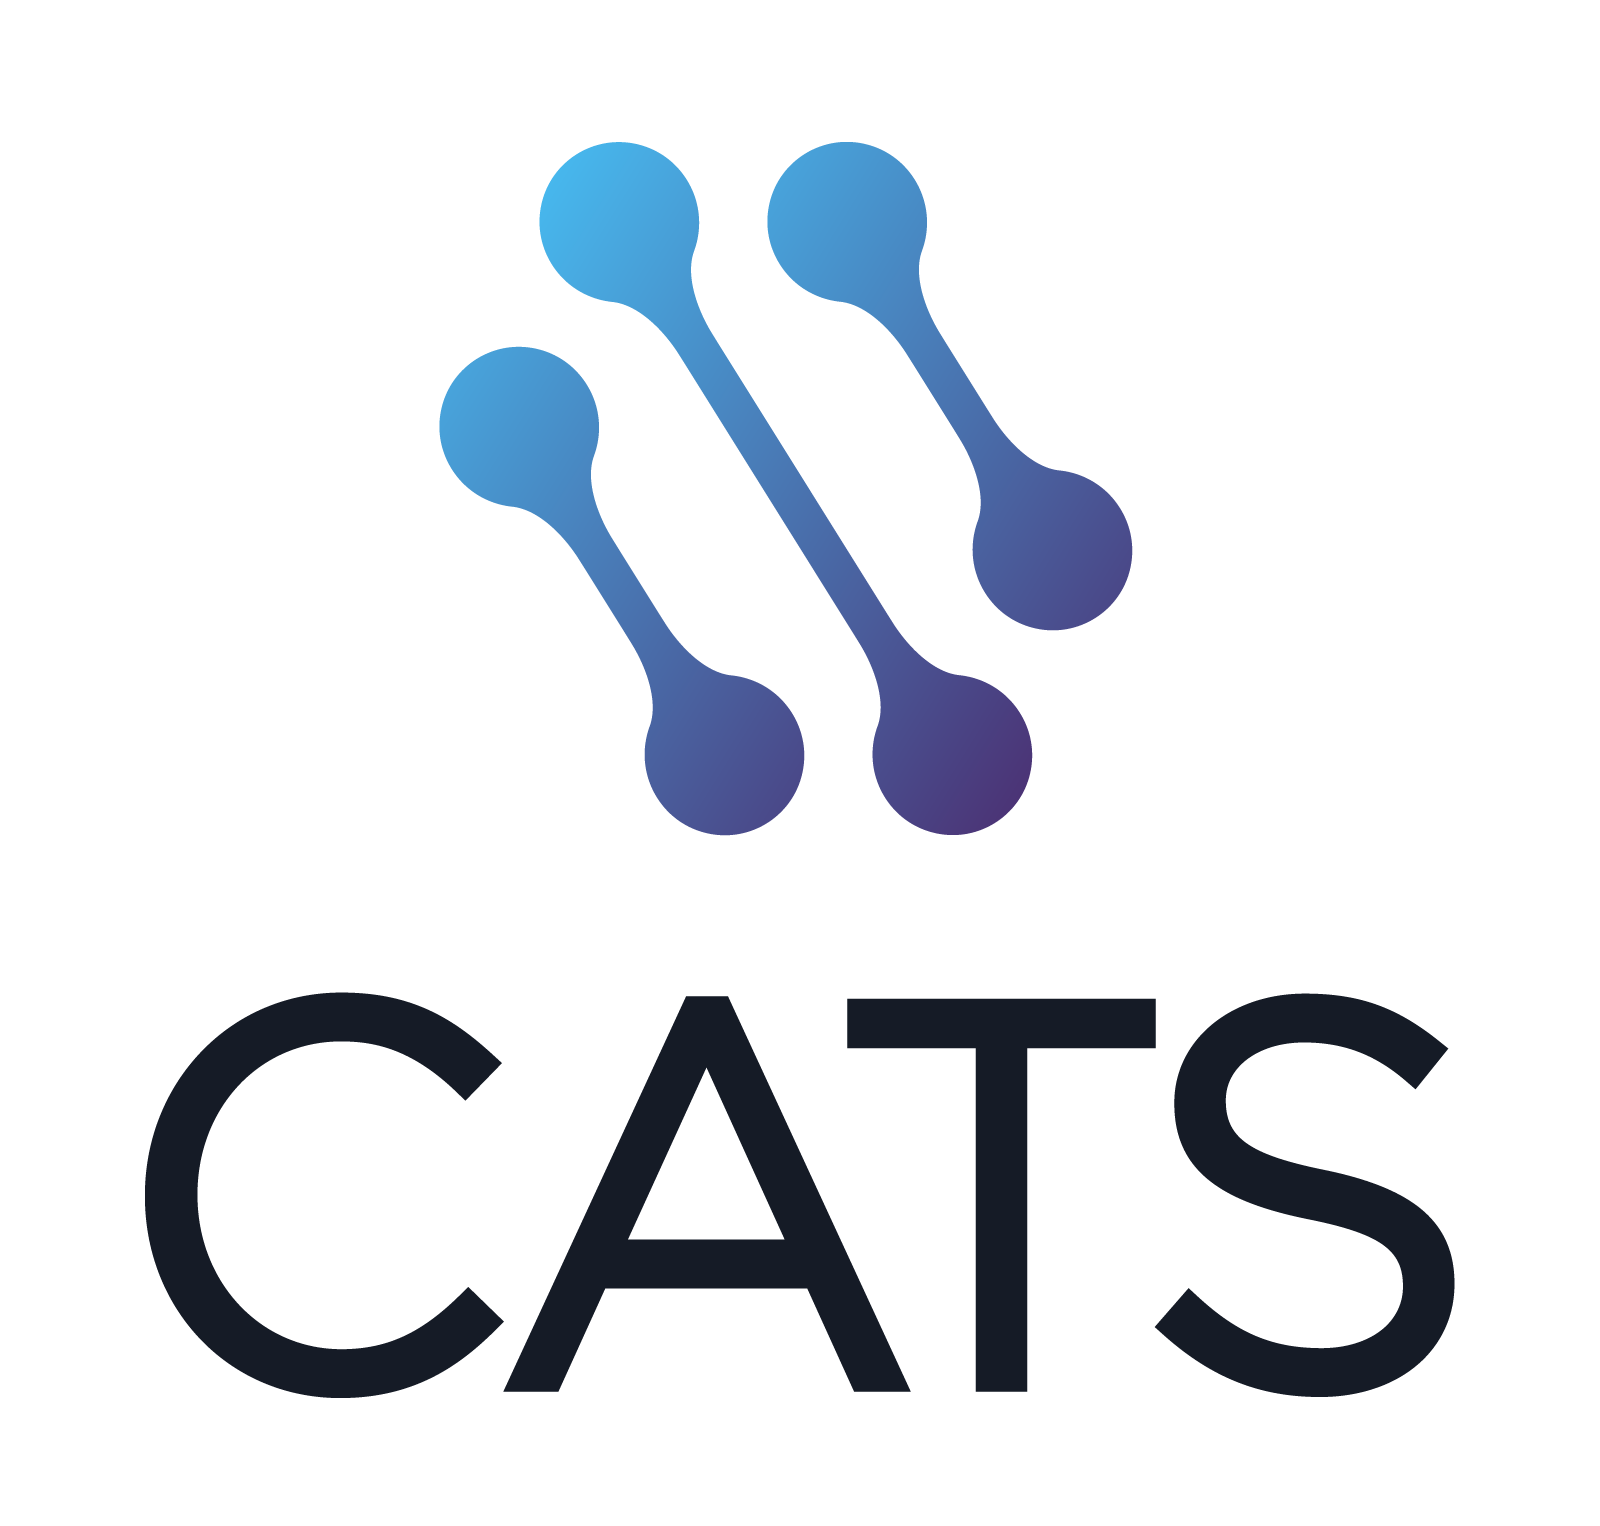 Home Cats Applicant Tracking System Ats Recruiting Software